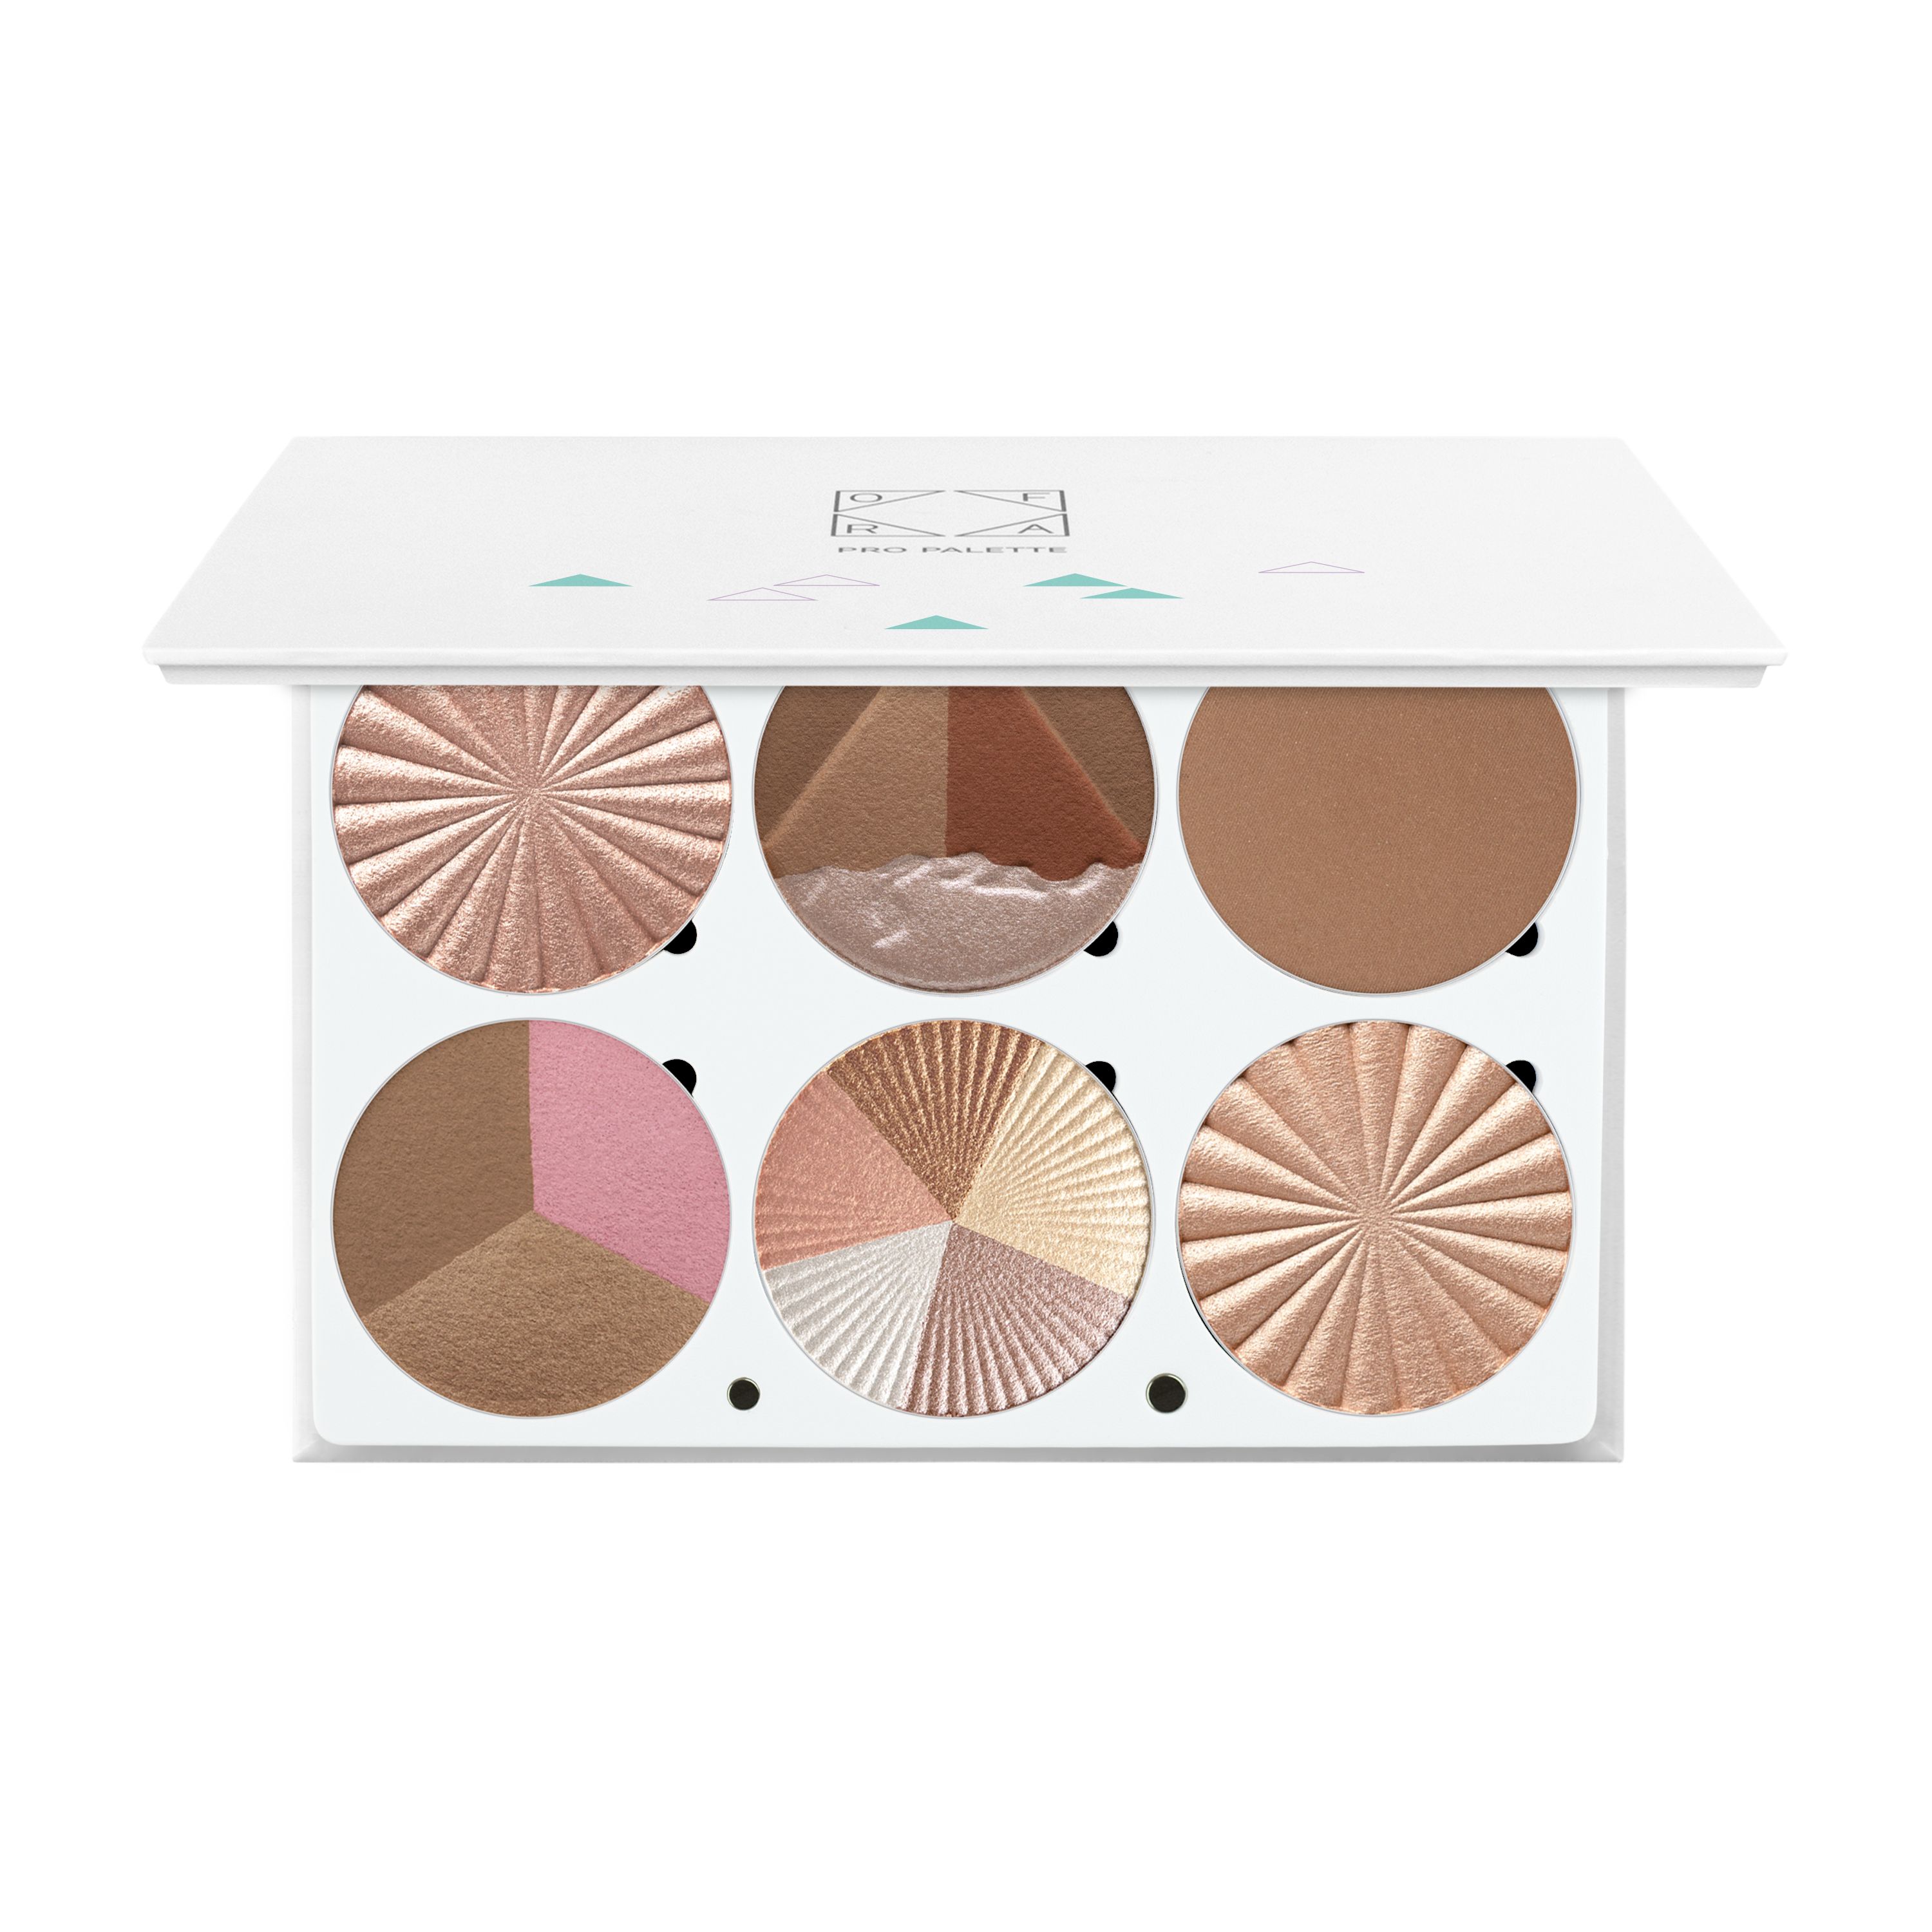 Pro Palette - On The Glow - OFRA Cosmetics | OFRA Cosmetics